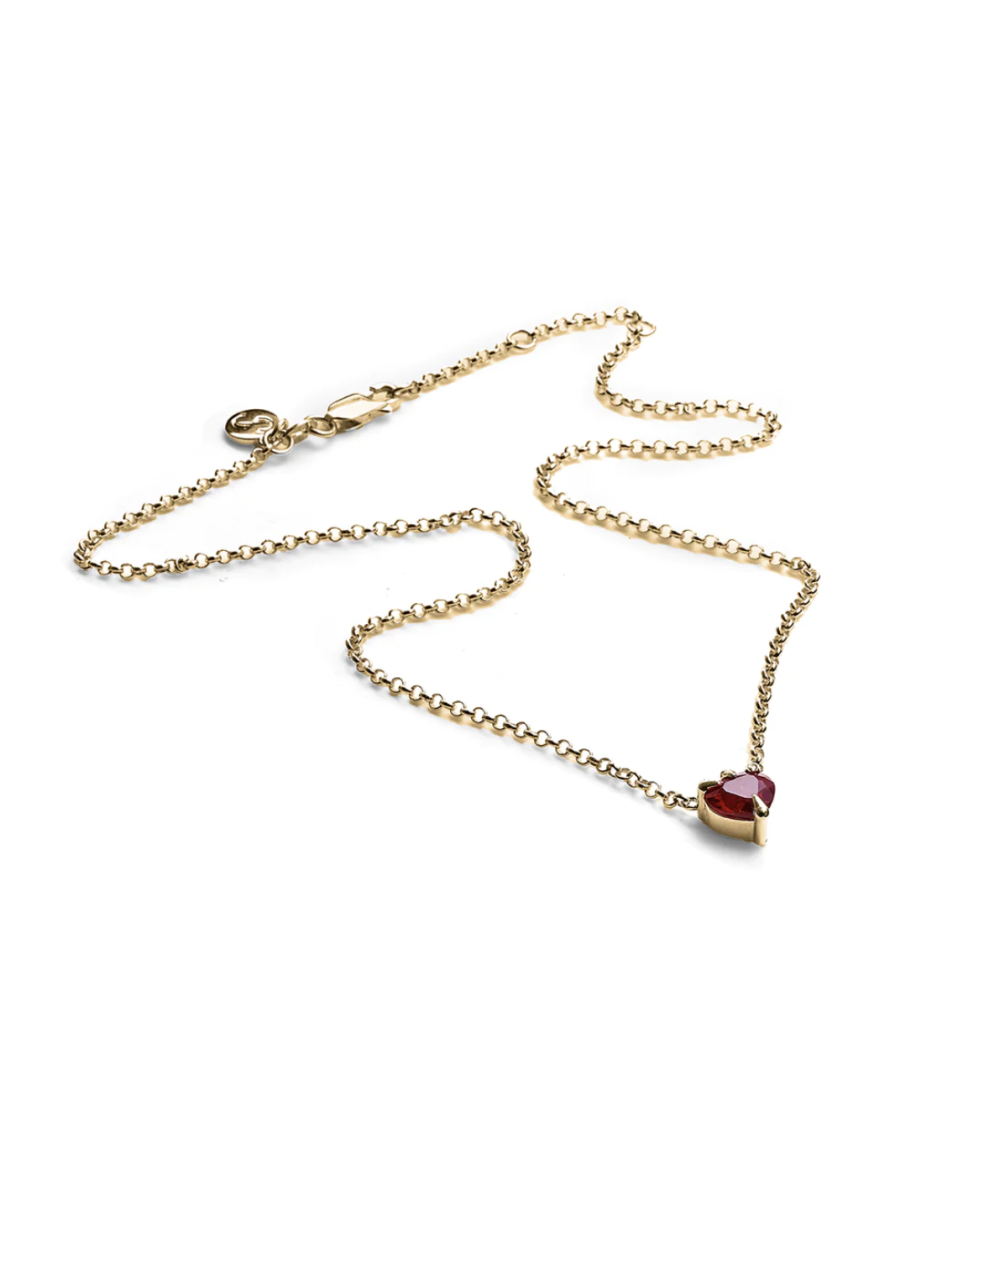 Stolen Girlfriends Club 18ct Yellow Gold Plated Talon Necklace with Garnet